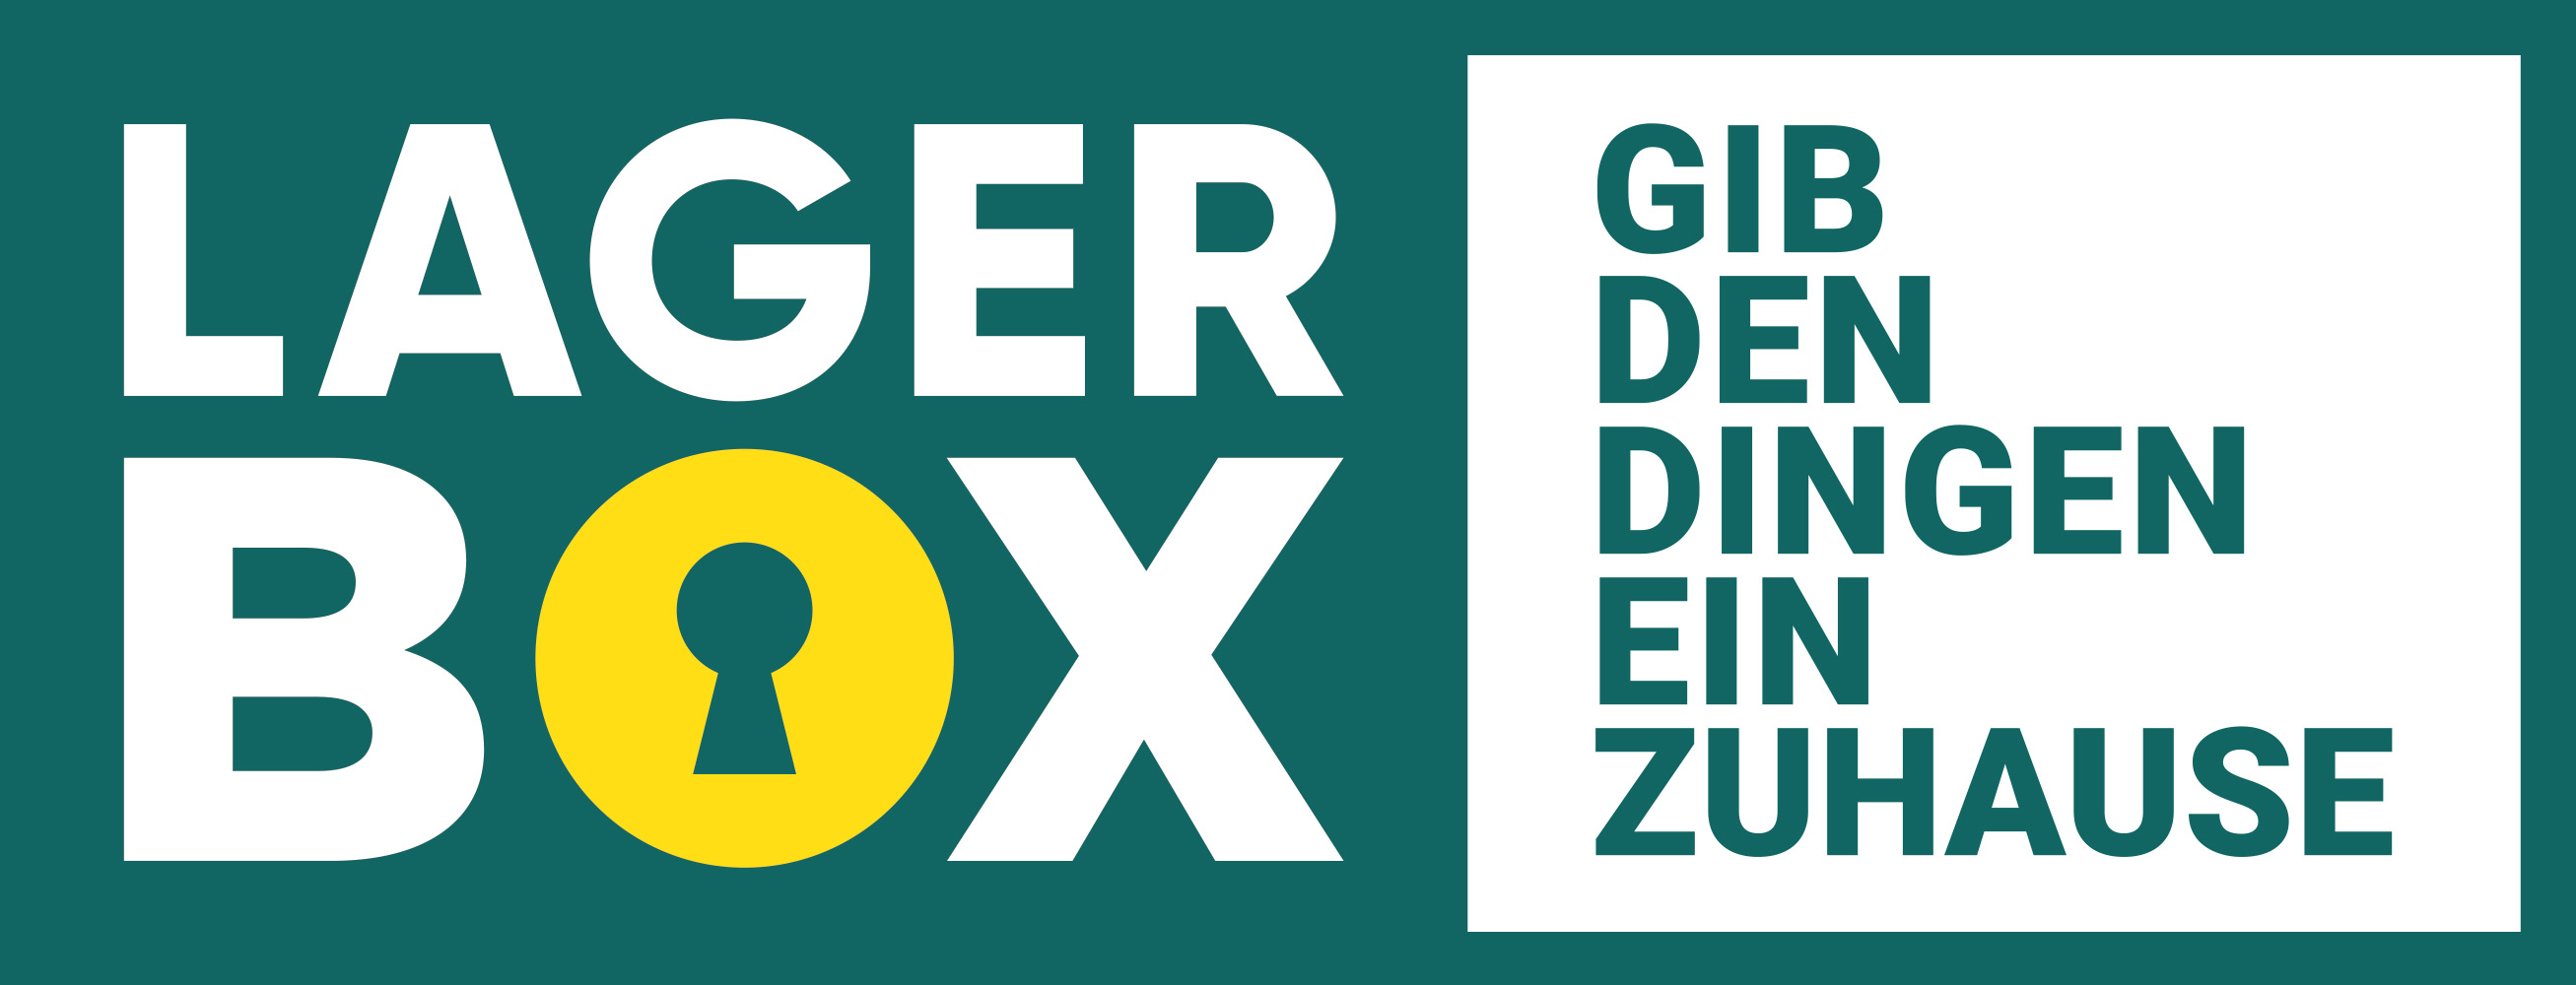 LAGERBOX